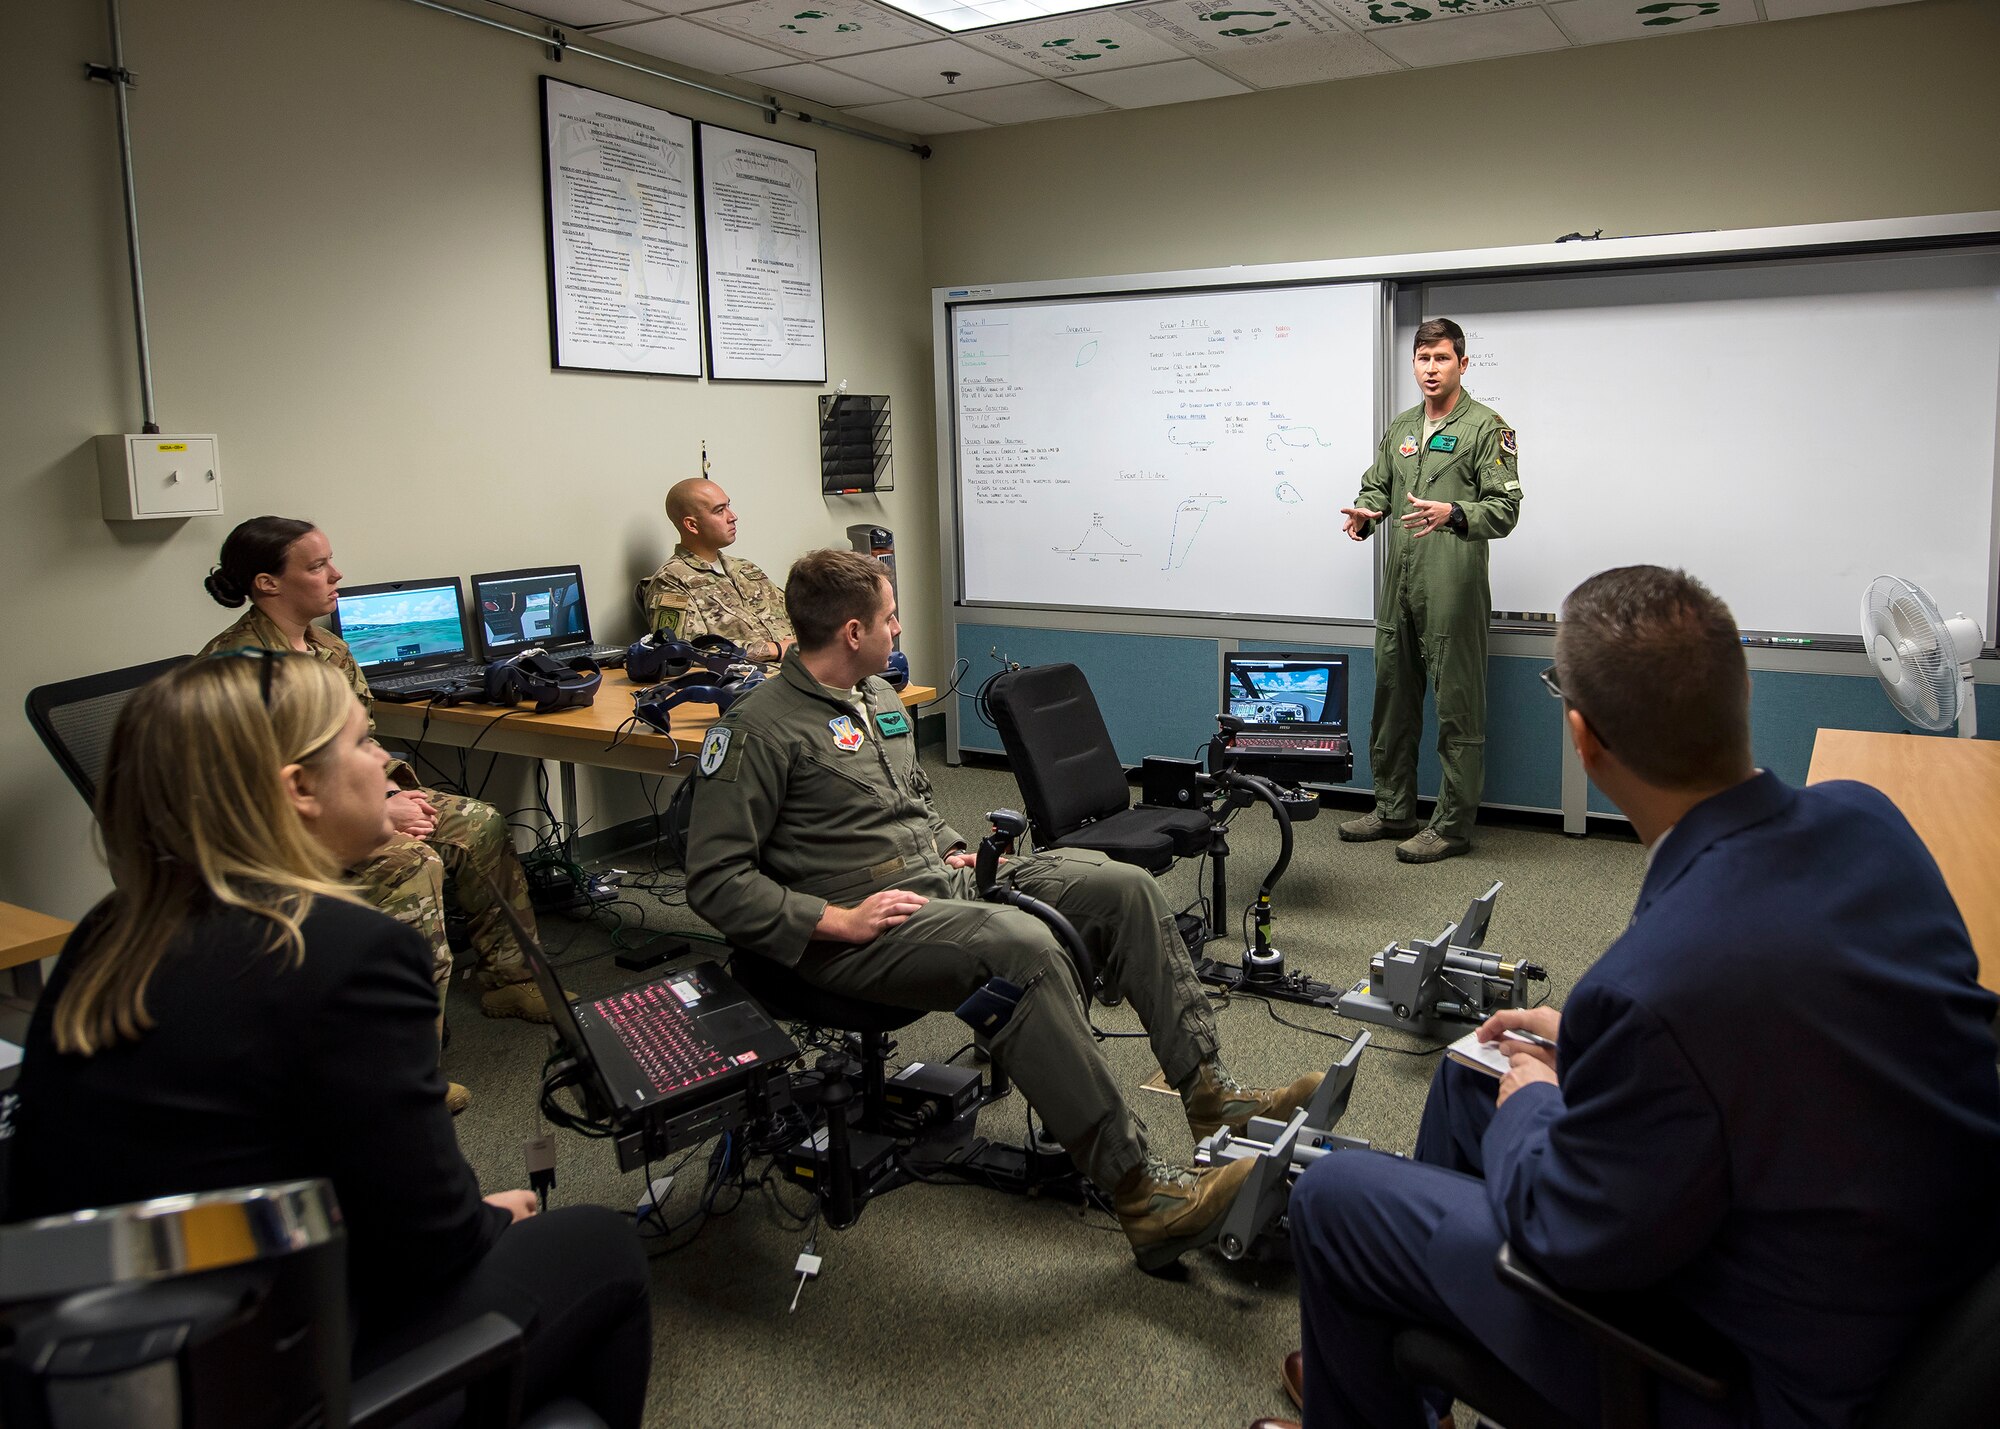 Maj. Patrick Mount, 41st Rescue Squadron (RQS) instructor pilot, briefs science and technology advisors from Air Combat Command, May 16, 2019, at Moody Air Force Base, Ga. Dr. John Matyjas and Dr. Donna Joyce visited the 41st RQS to tour and assess their Virtual Reality flight simulator. The visit is a part of an Air Force assessment of the possible implementation of VR in training. The 41st RQS VR flight simulator is an initiative that was selected at the Moody Air Force Base 2018 Spark Tank competition. (U.S. Air Force photo by Airman 1st Class Eugene Oliver)